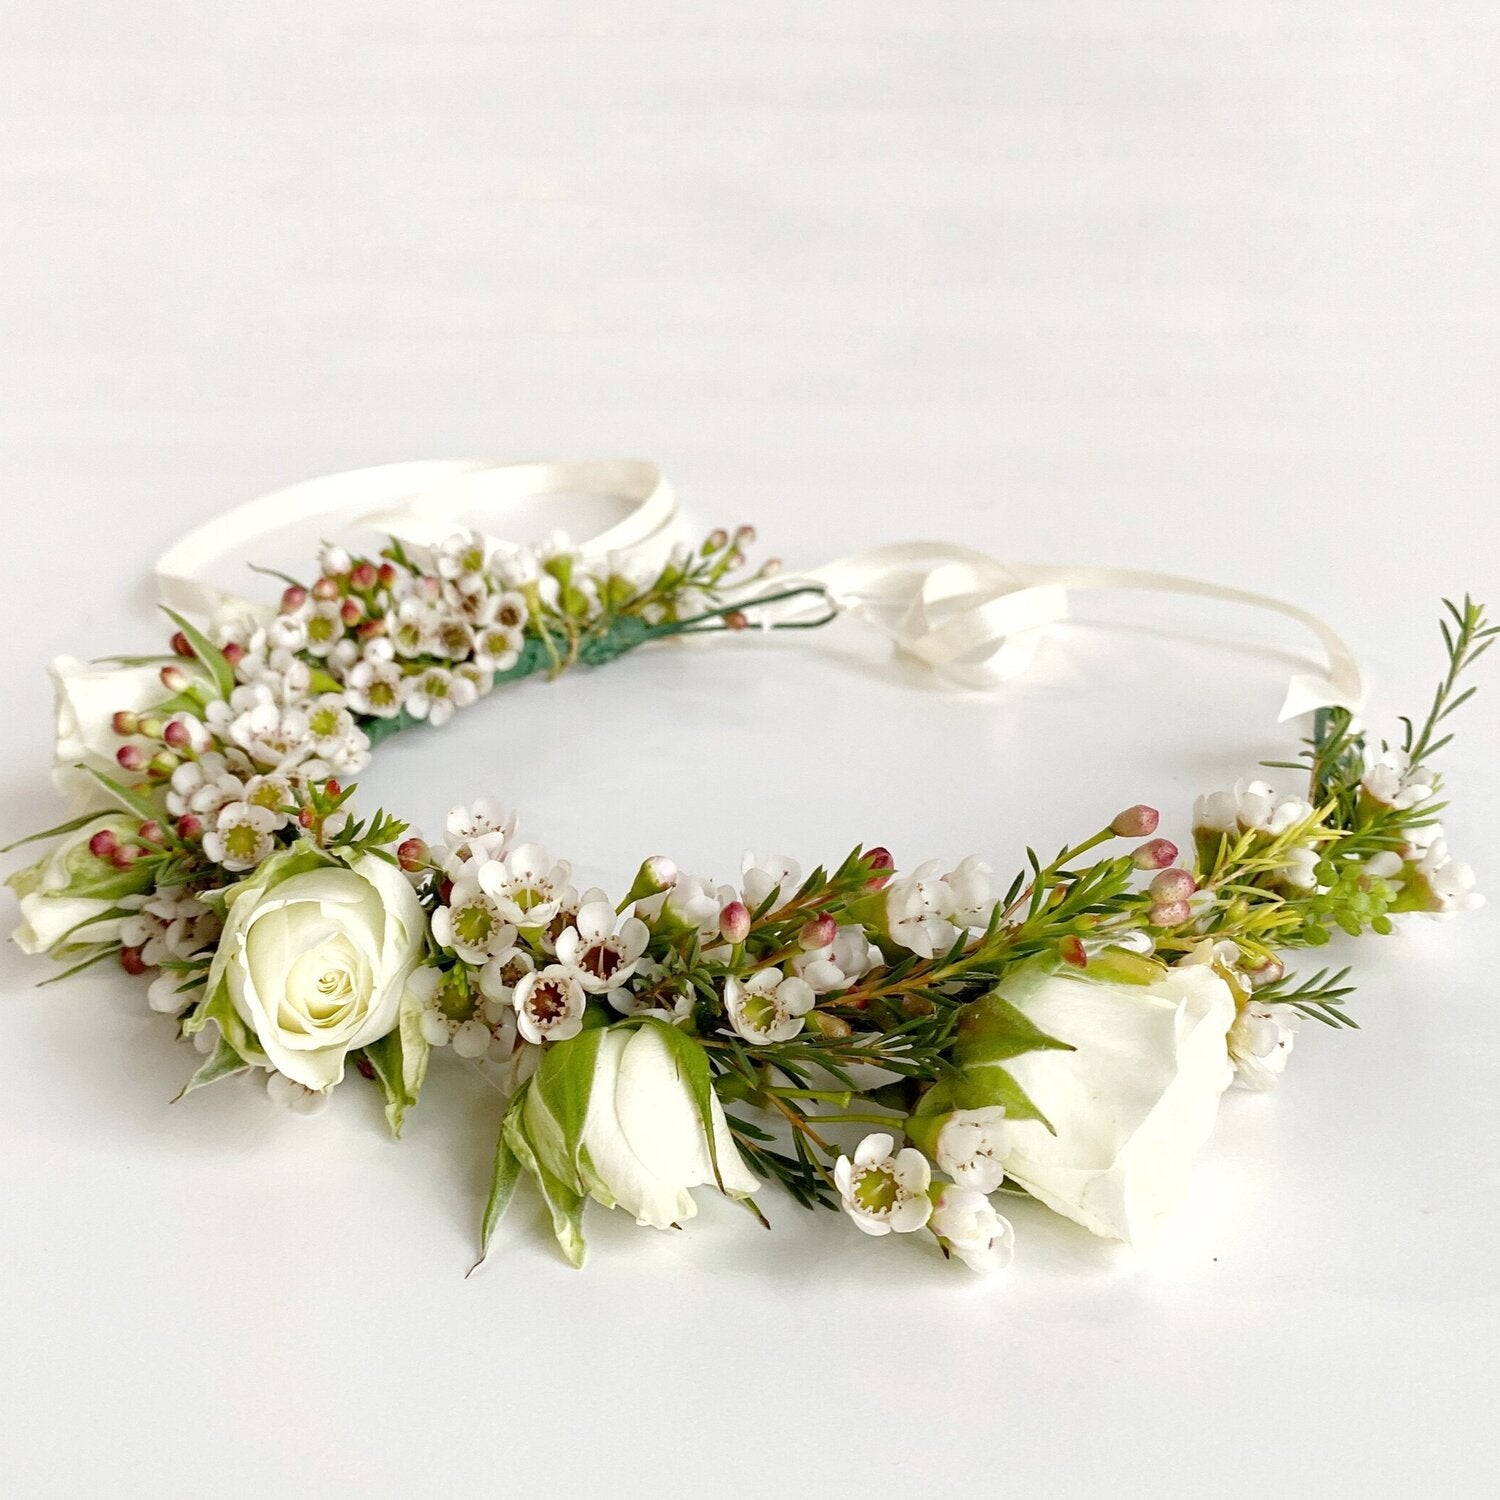 Live Like A Princess with a Flower Crown from Everbloom Design